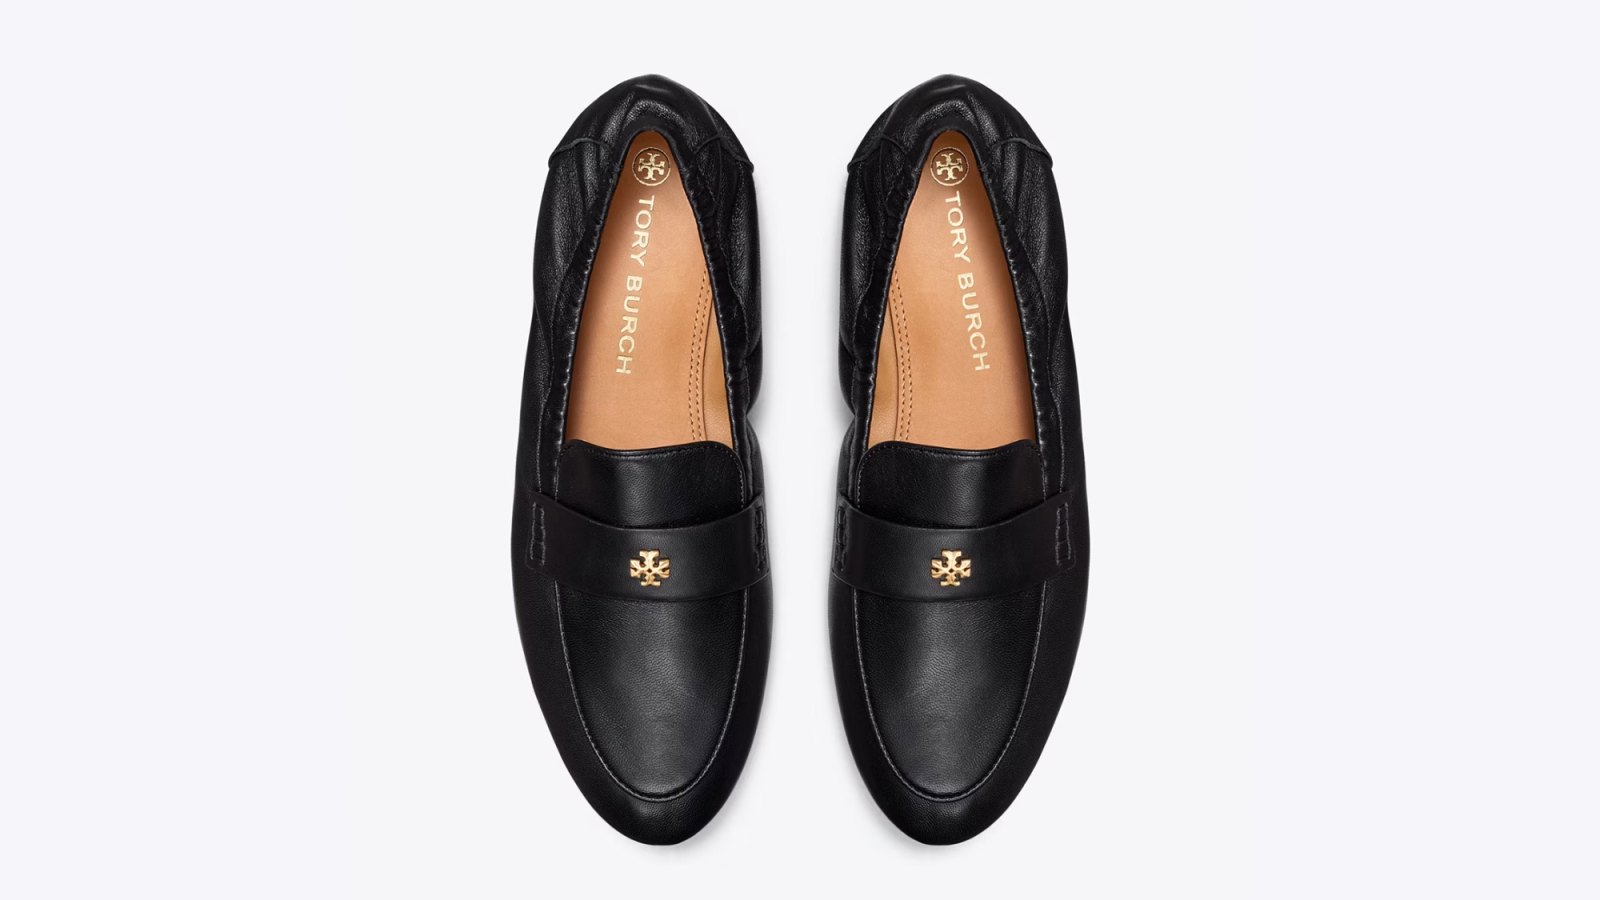 Tory Burch's New Ballet Flat Is Our Go-To Spring Shoe